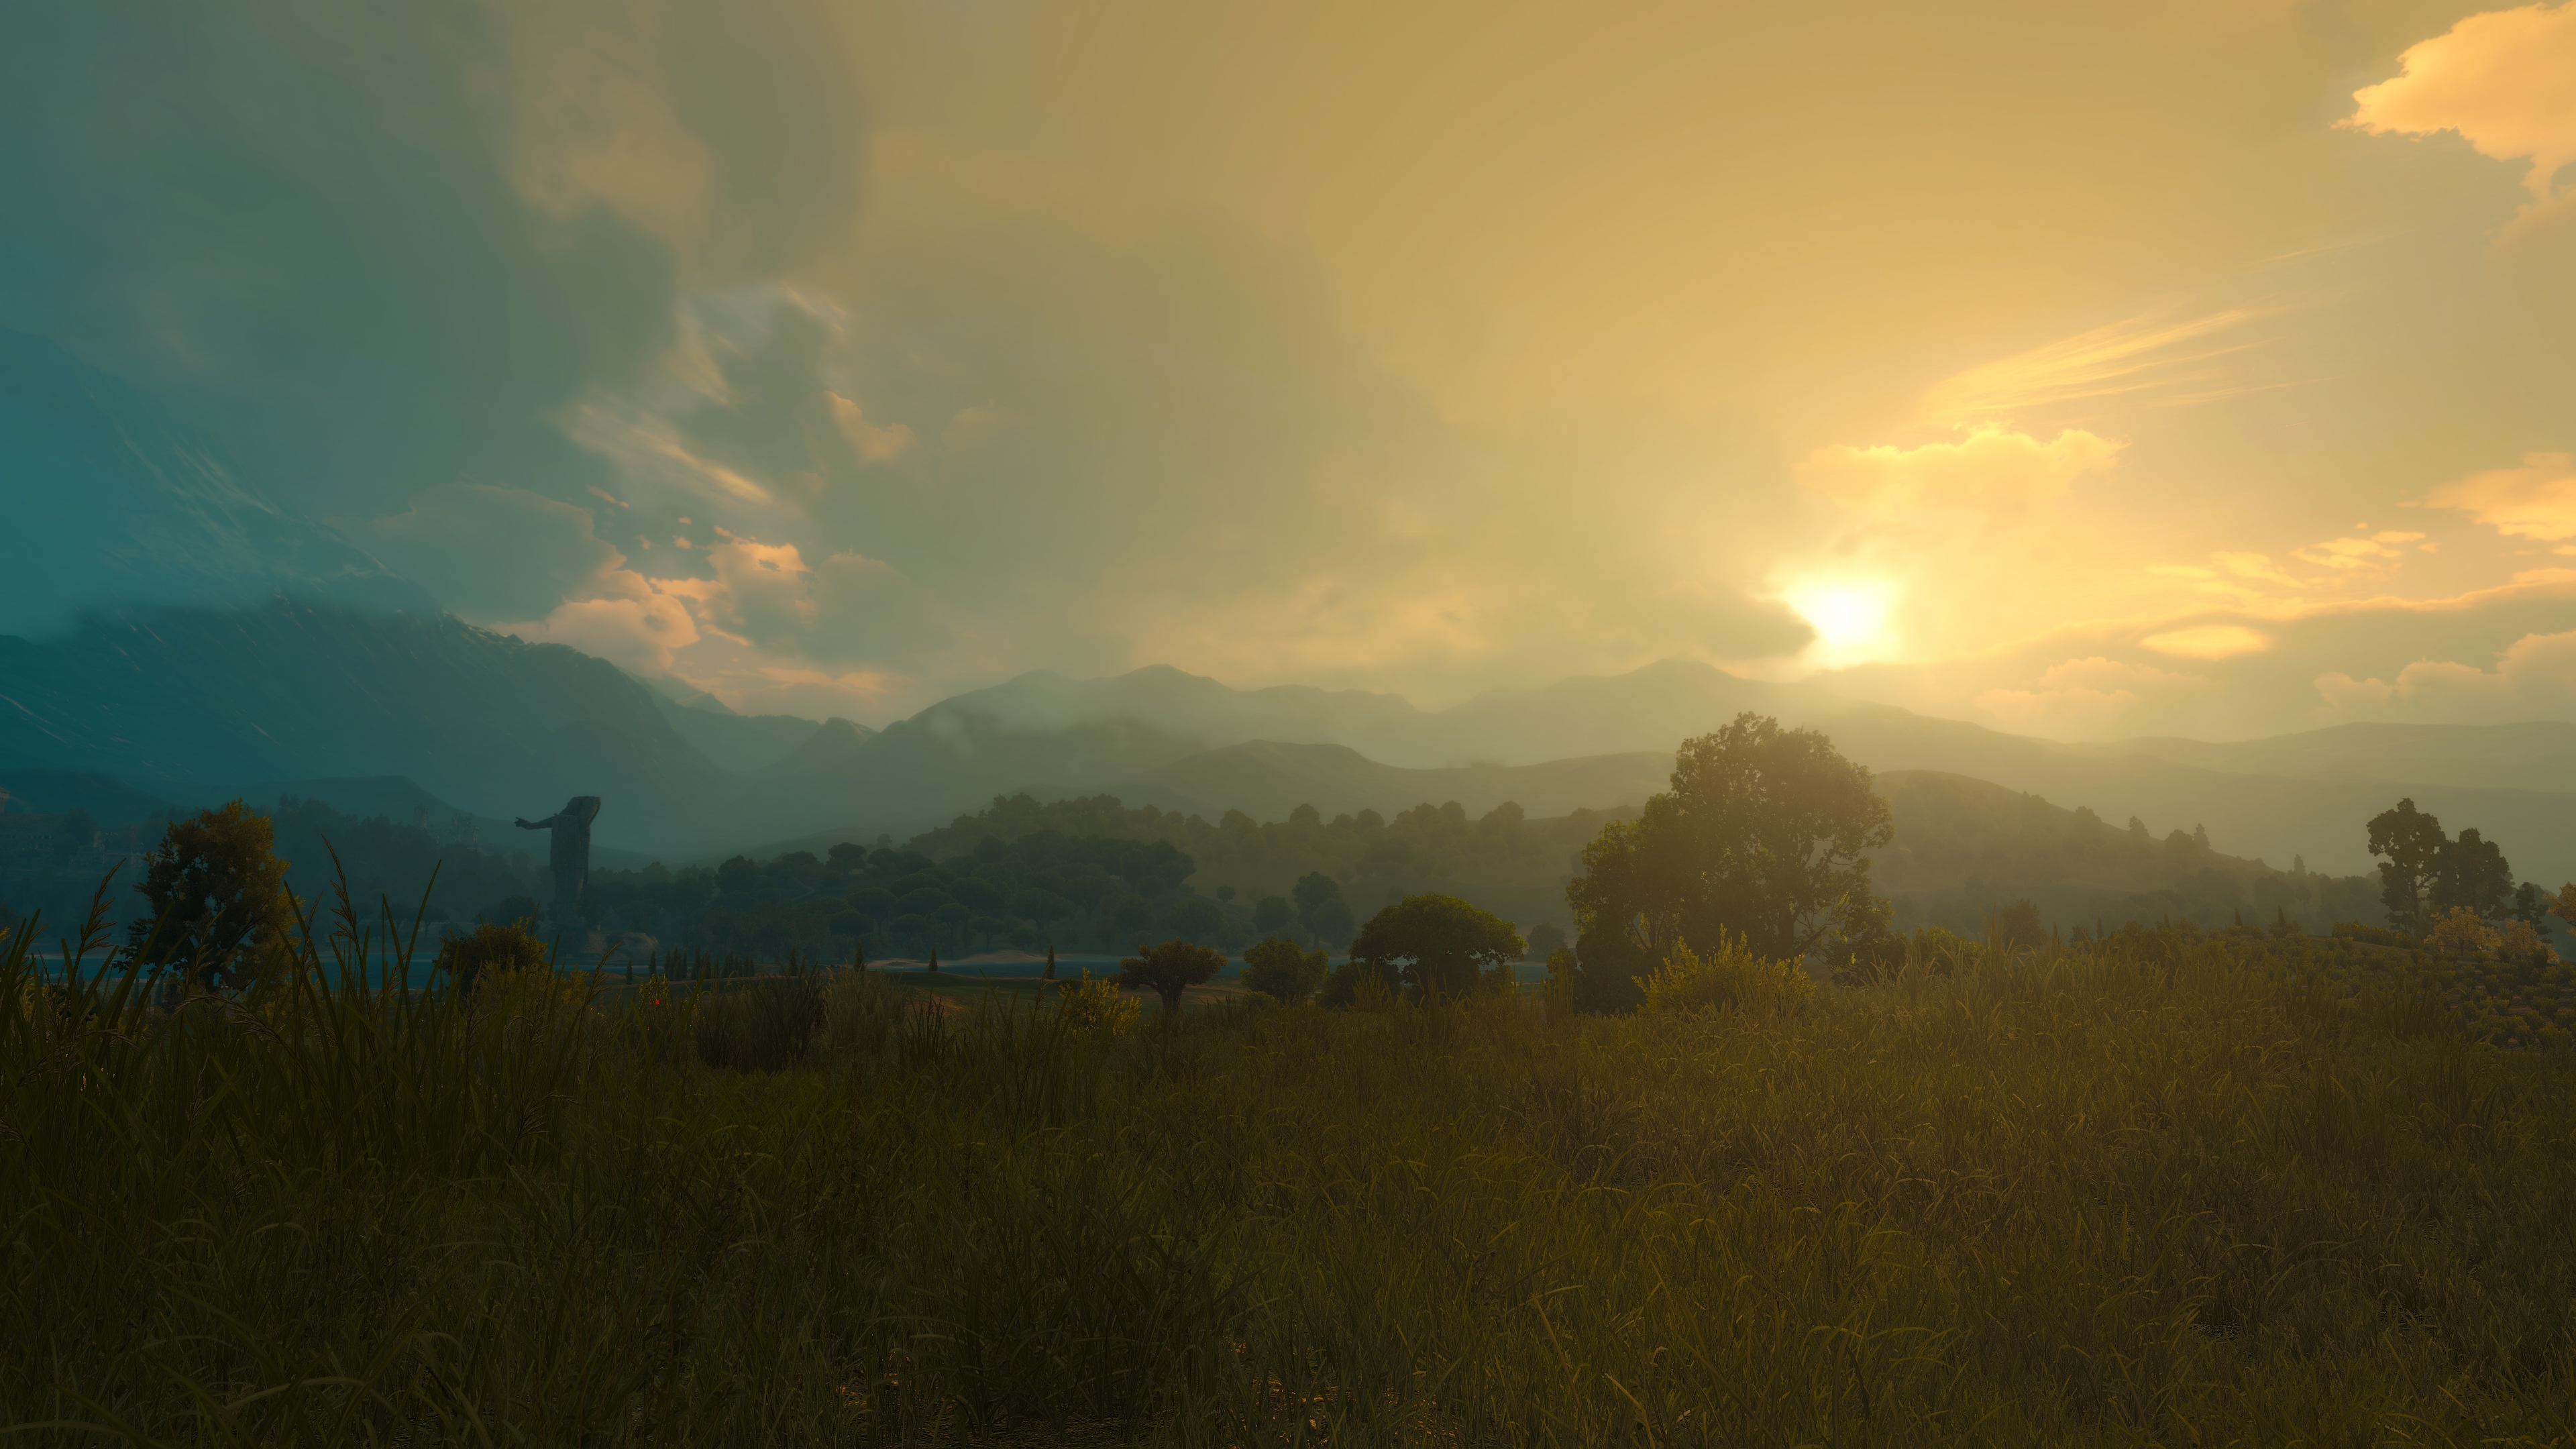 General 3840x2160 The Witcher 3: Wild Hunt screen shot PC gaming tussent video games video game art sunlight landscape statue sky Sun CGI sunset sunset glow field